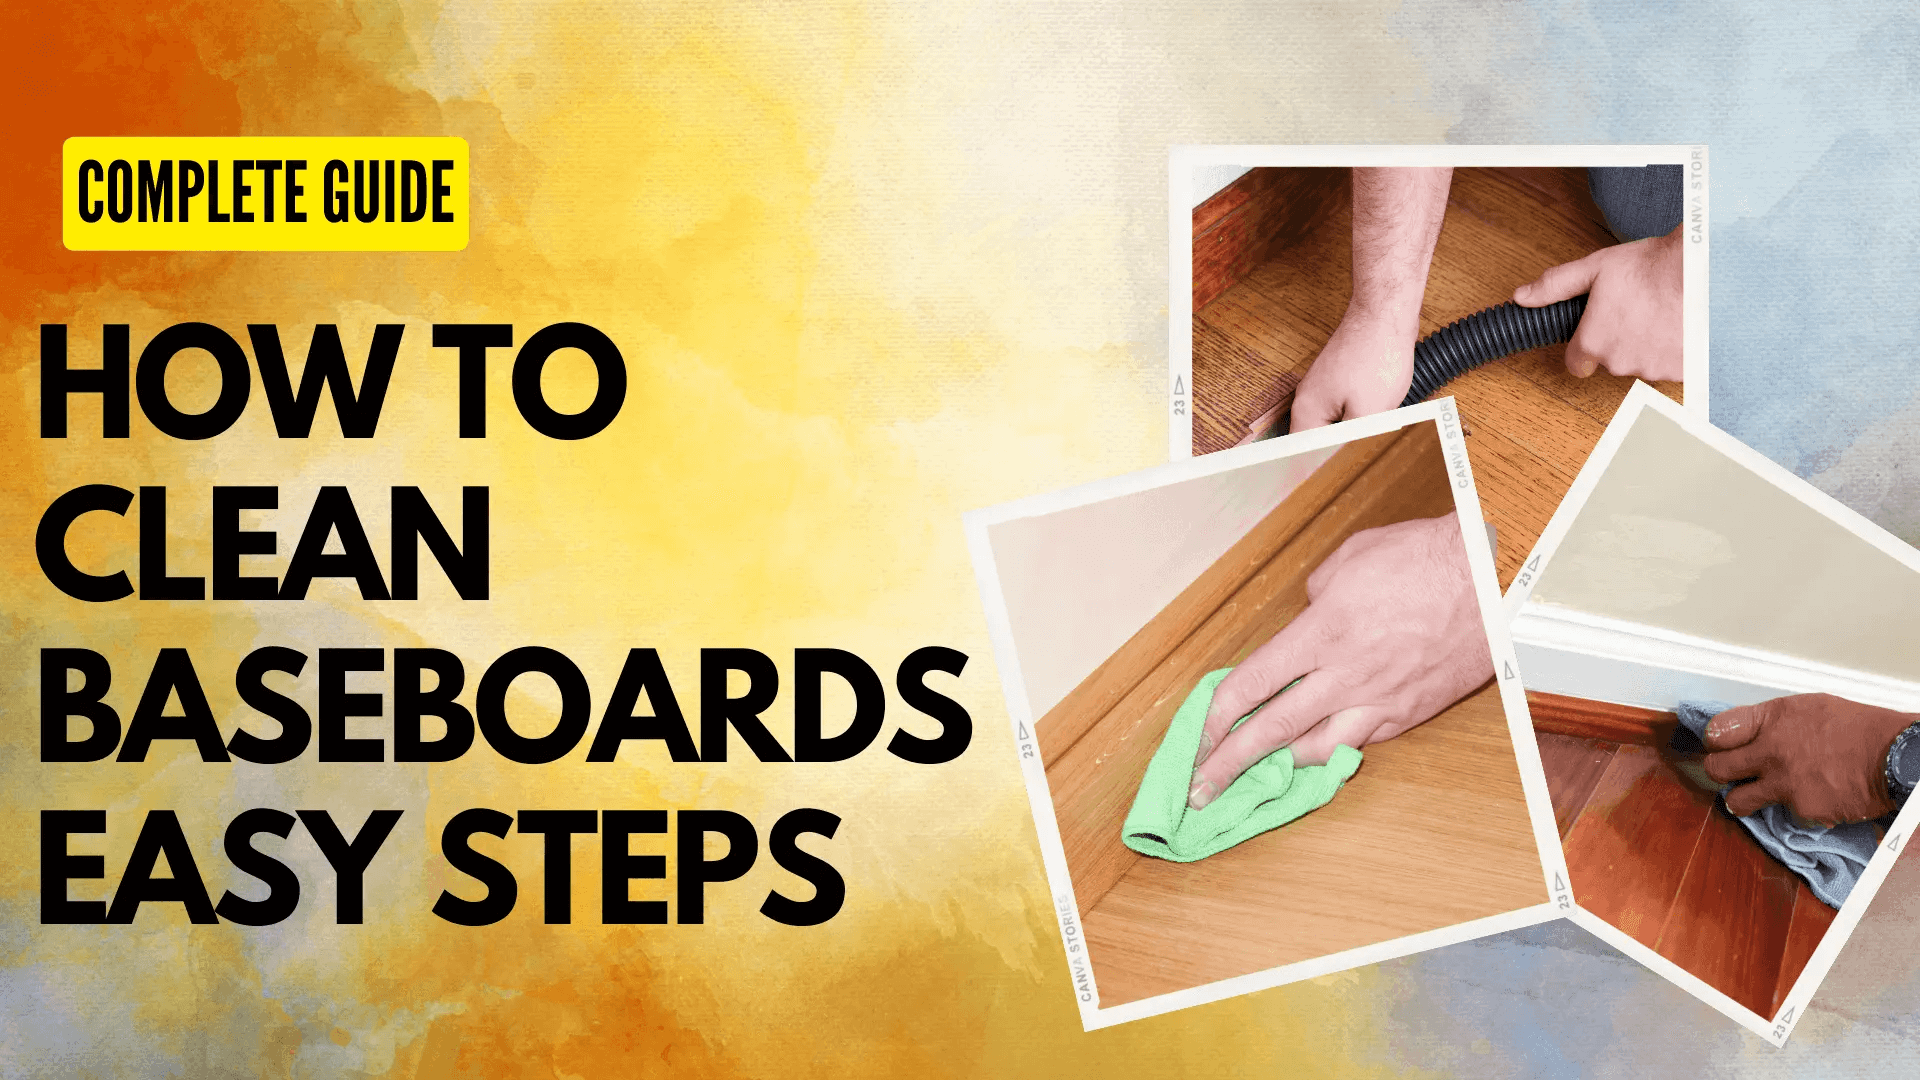 How to Clean Baseboards – Keep Your Baseboards Spotless with These Cleaning Tips